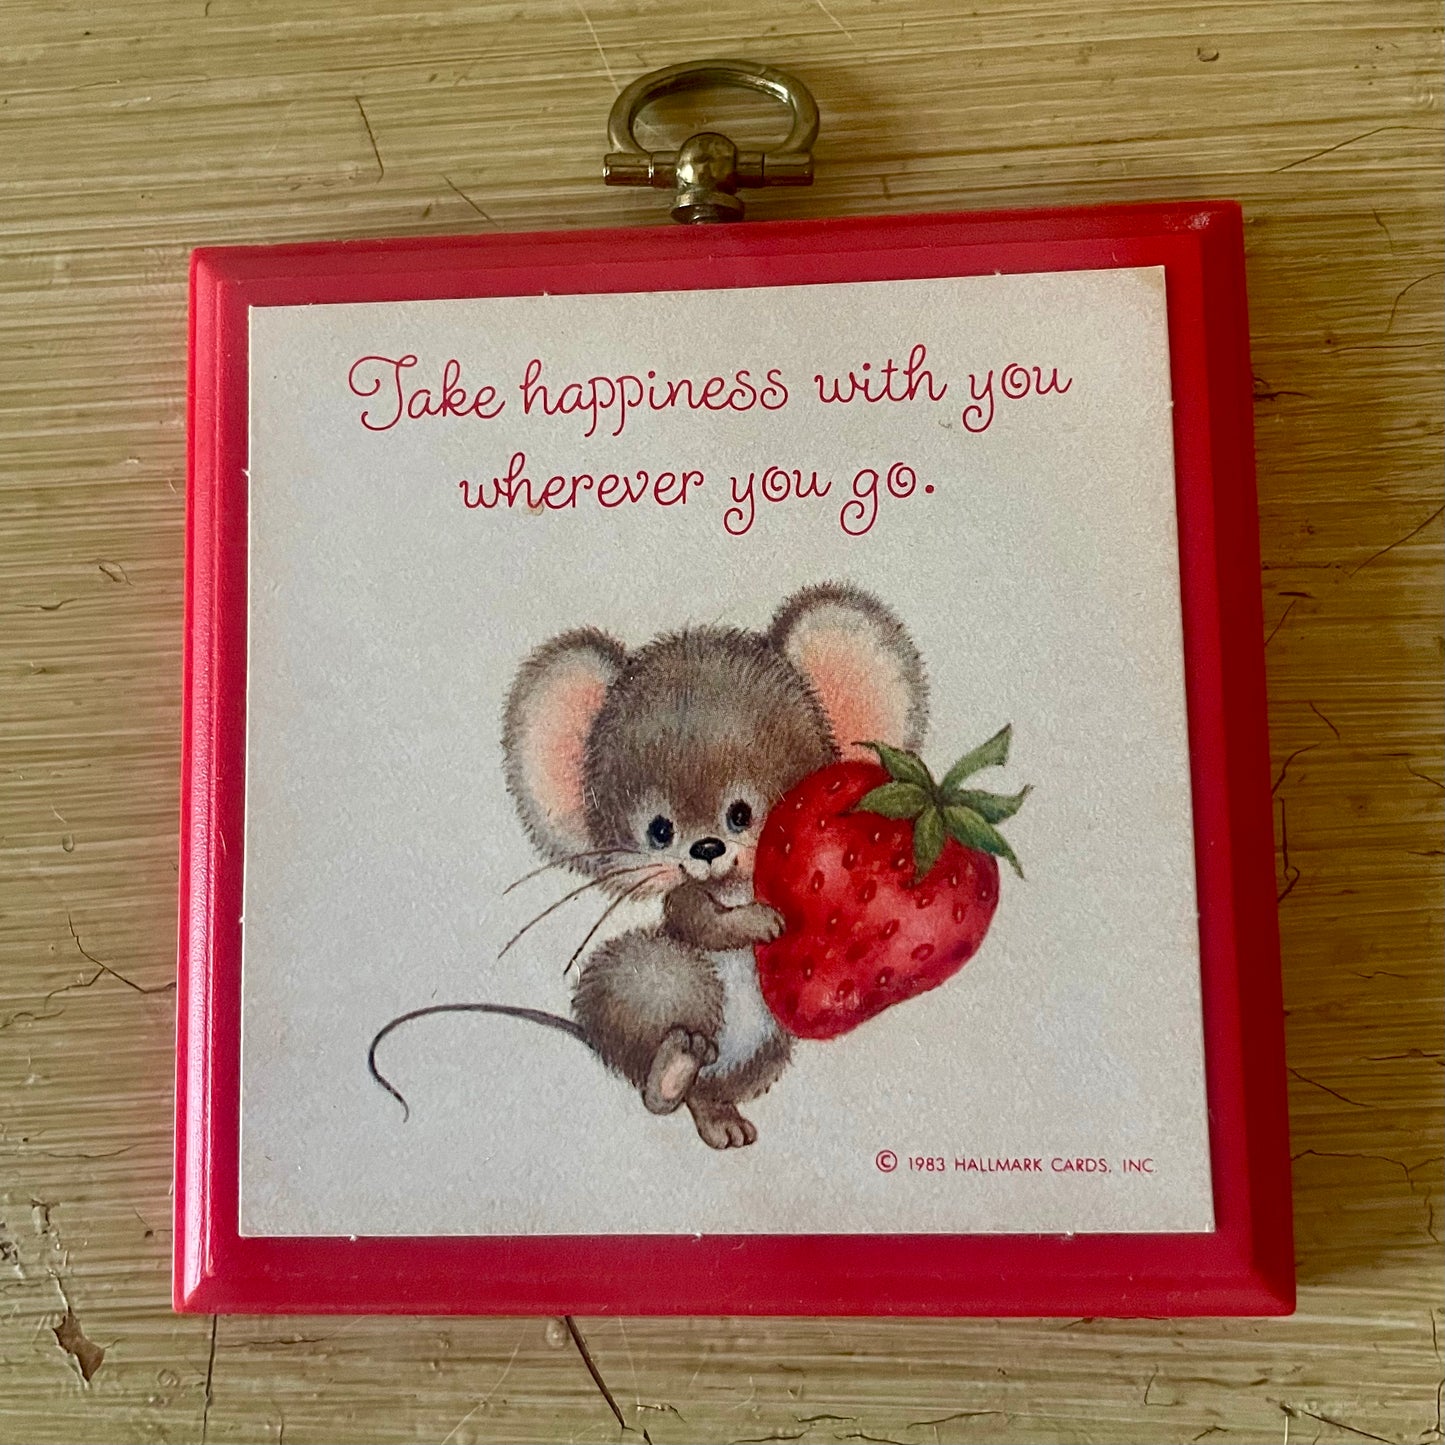 1983 Hallmark “Take Happiness with You” Strawberry Mouse Wall Plaque